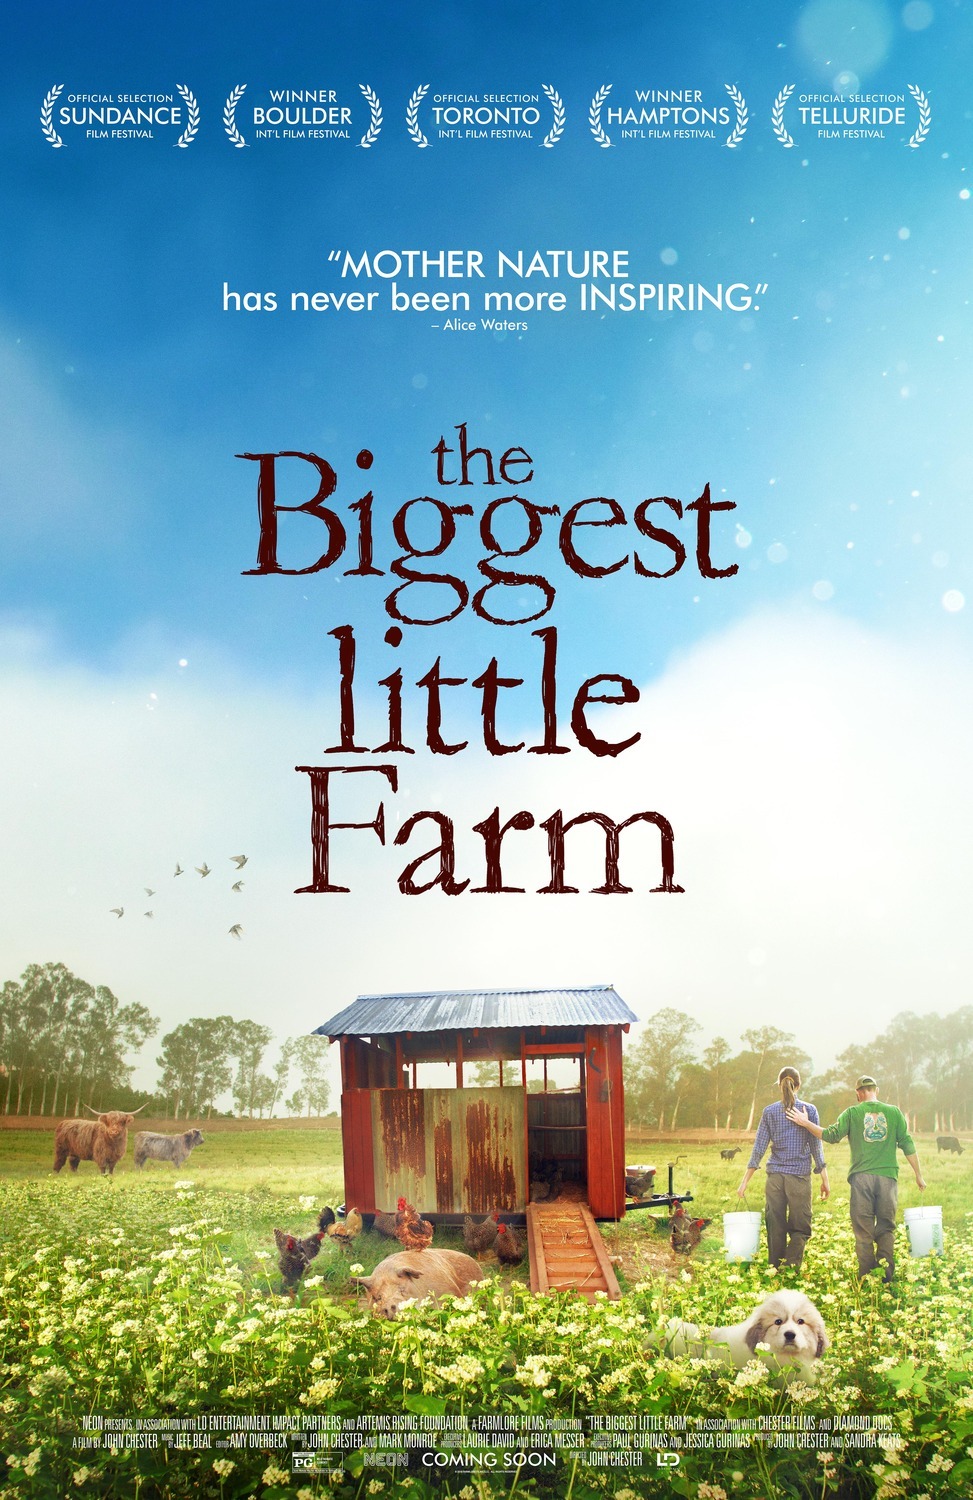 cover of the DVD film The Biggest Little Farm shows the backs of a man and woman walking through a farm field. A dog, two highland cows and chickens next to a red chicken coop.